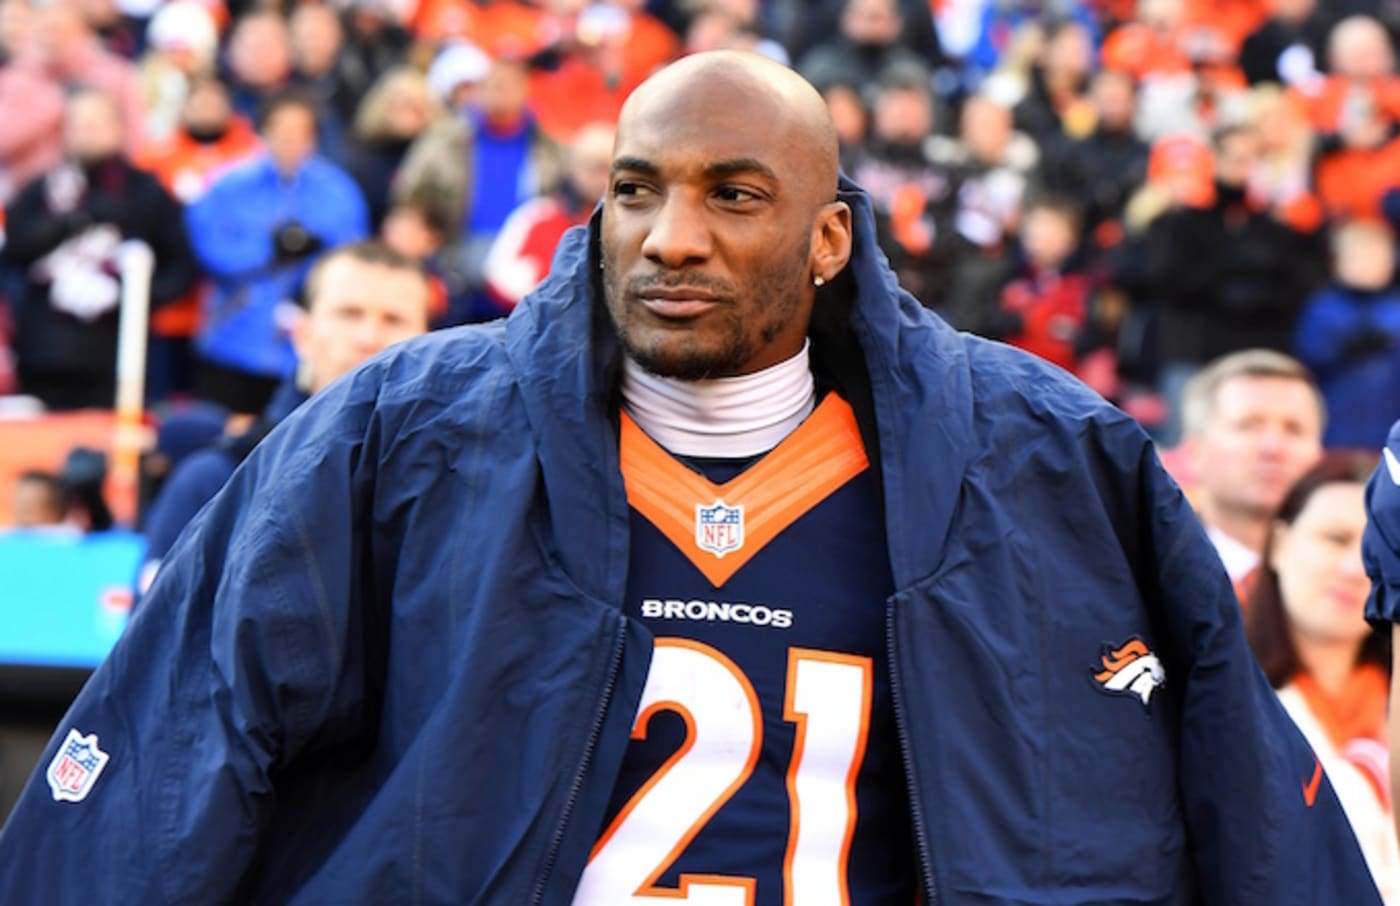 Aqib Talib watches game from the sidelines.